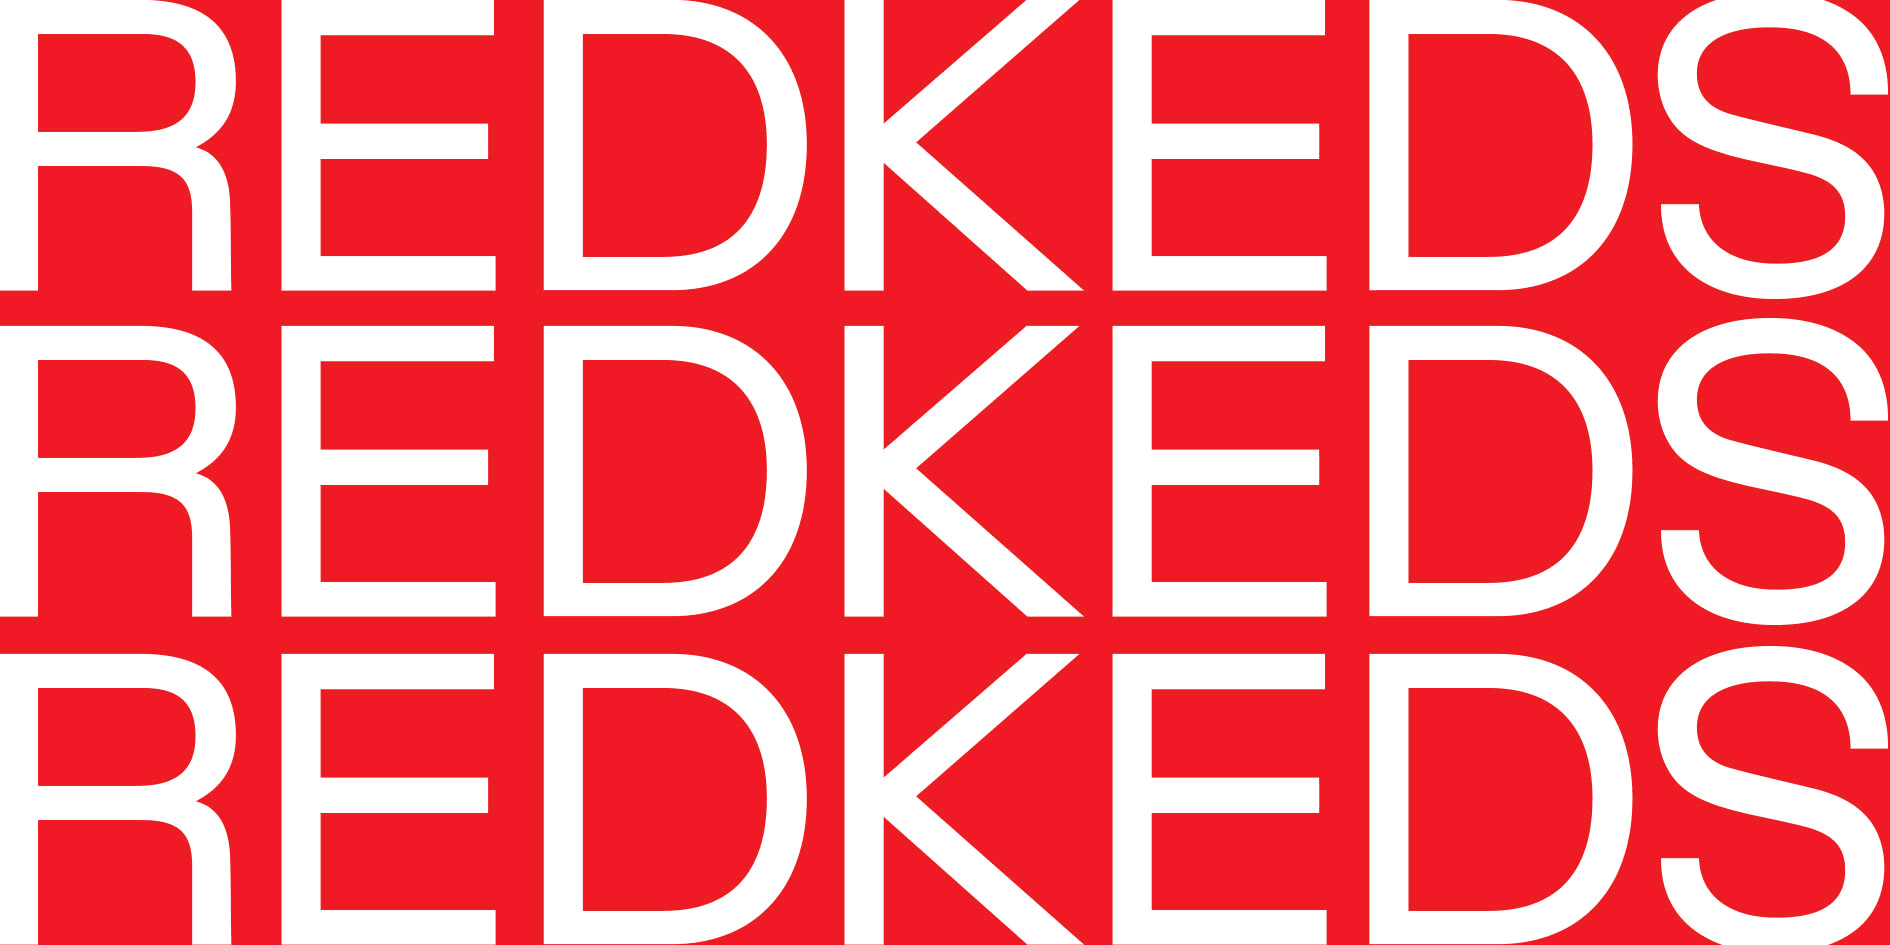 REDKEDS